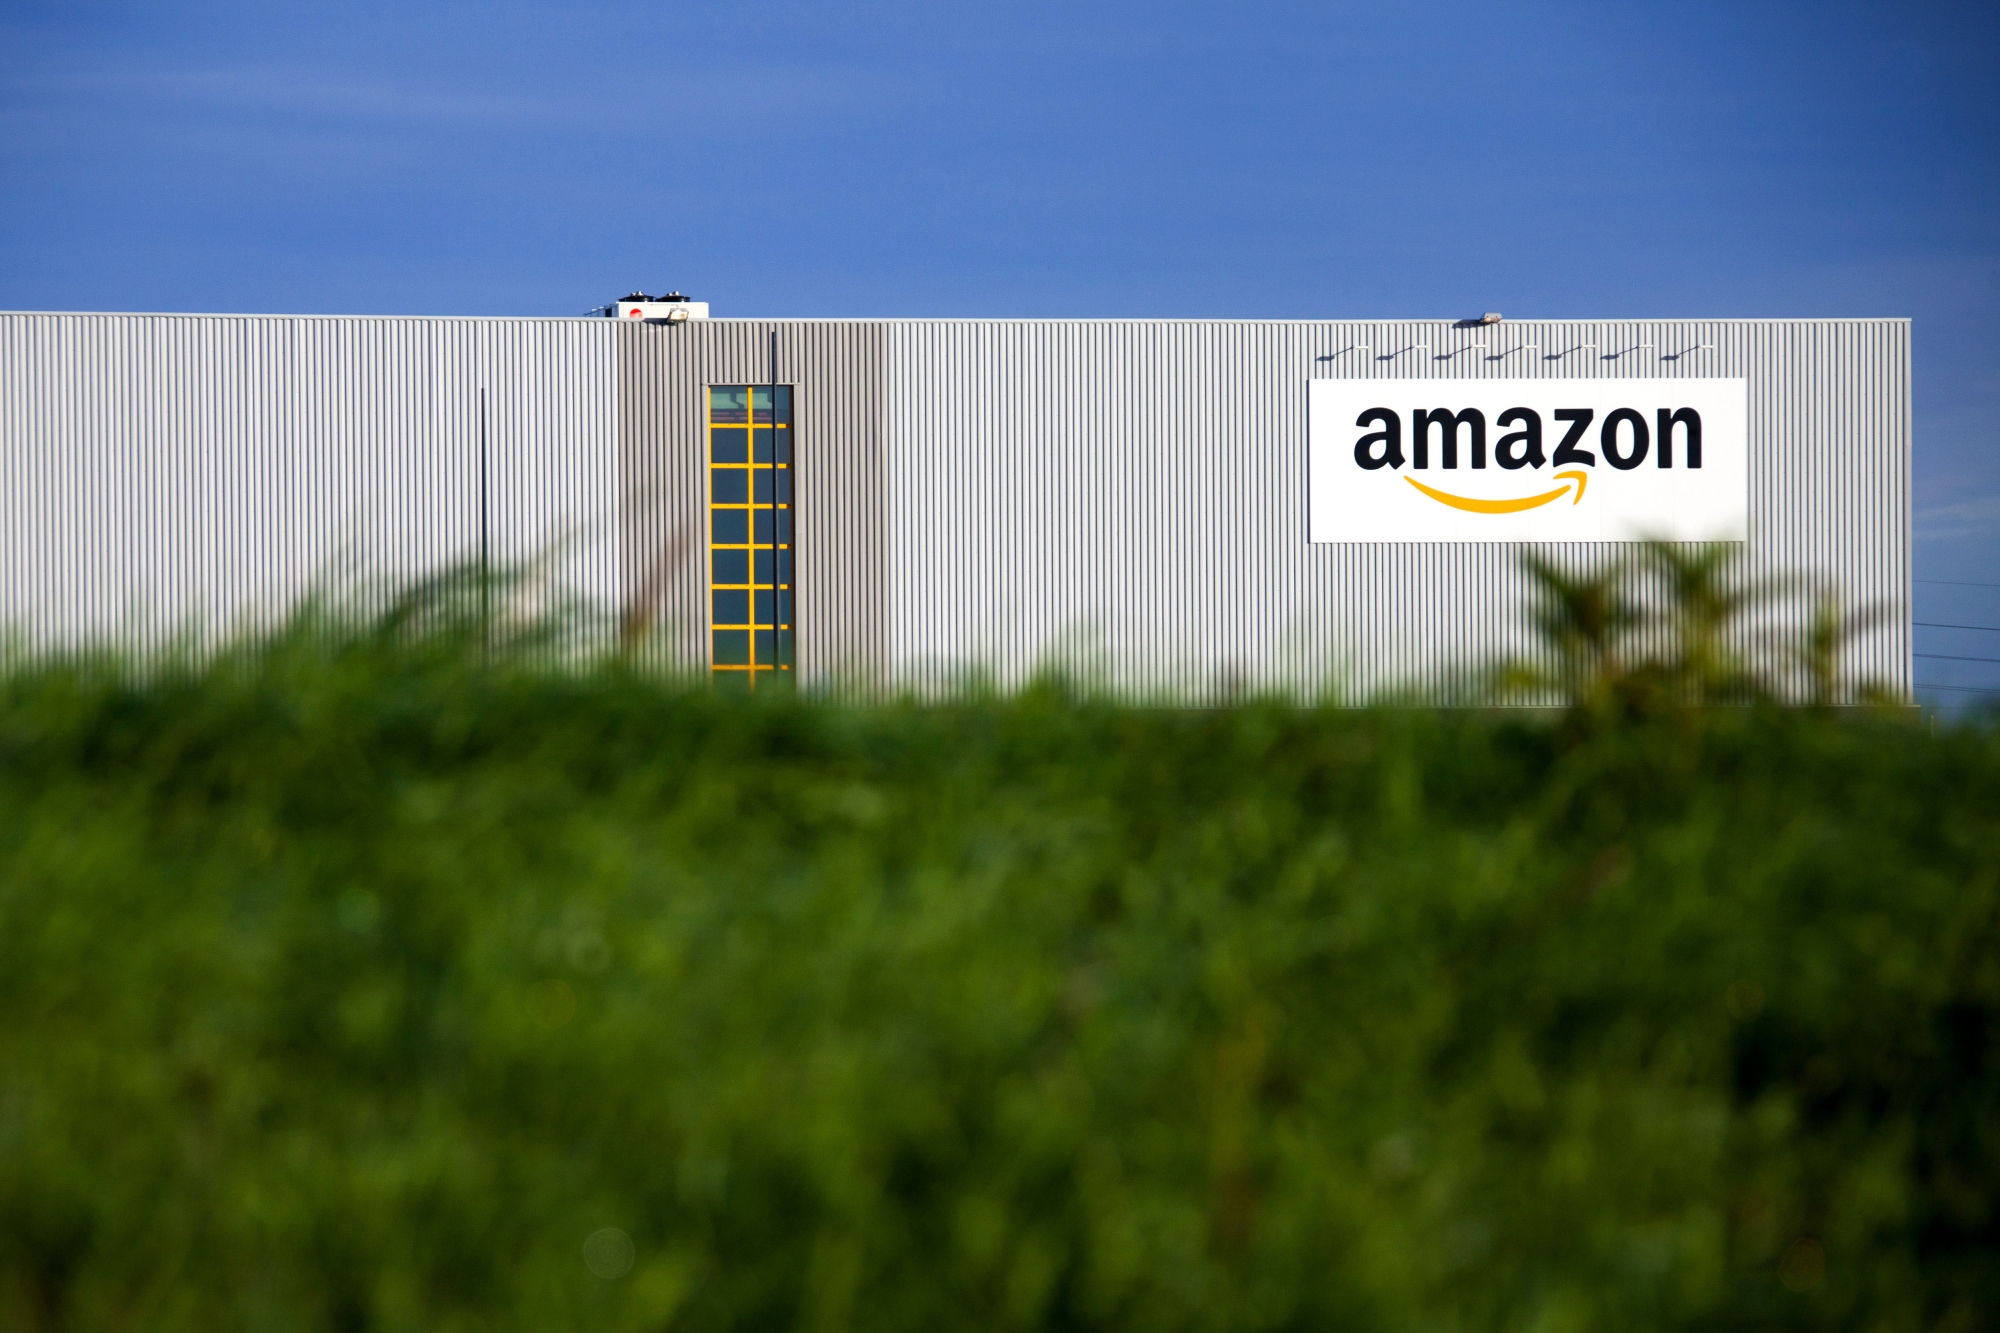 This Sept.19, 2013 photo shows the logistics center of online merchant Amazon in Lauwin-Planque, northern France. The Organization for Economic Cooperation and Development released a plan Monday, Oct.5, 2015 to end tax shelters and require companies to pay taxes in the countries where they earn profits, among other measures. Google, Facebook, Starbucks and Amazon are among many companies criticized for shifting profits to low-tax jurisdictions. (AP Photo/Michel Spingler)